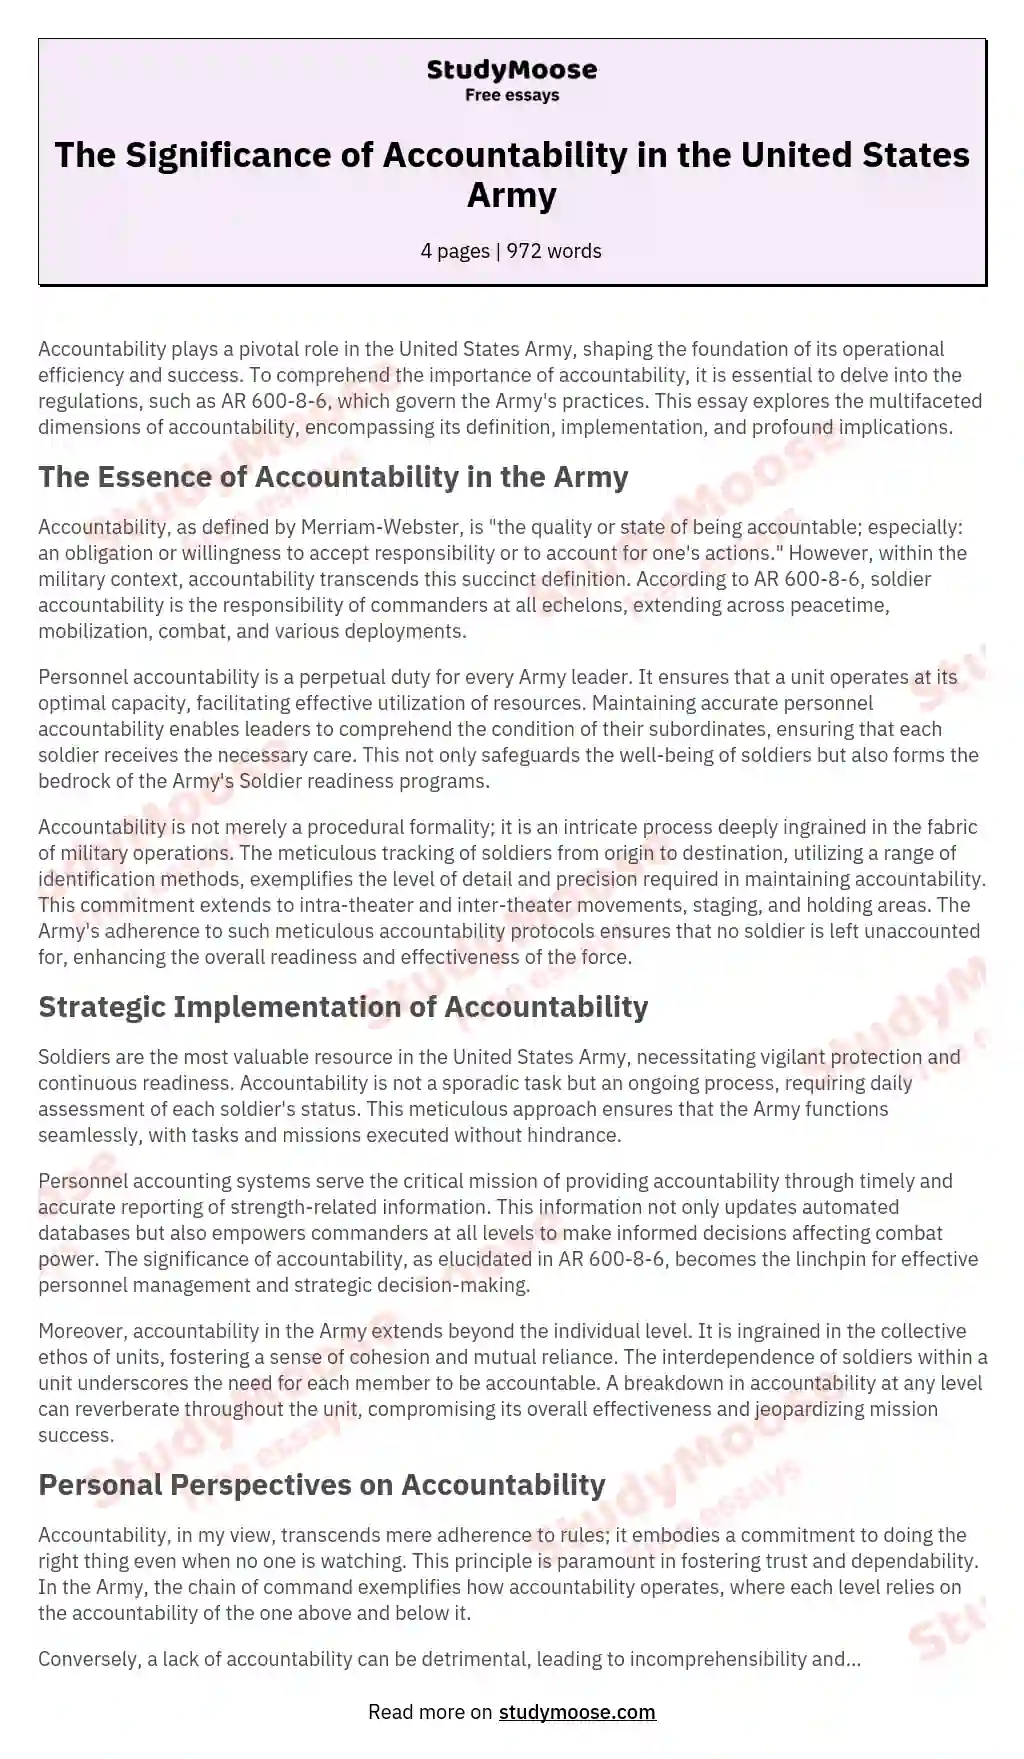 The Significance of Accountability in the United States Army essay